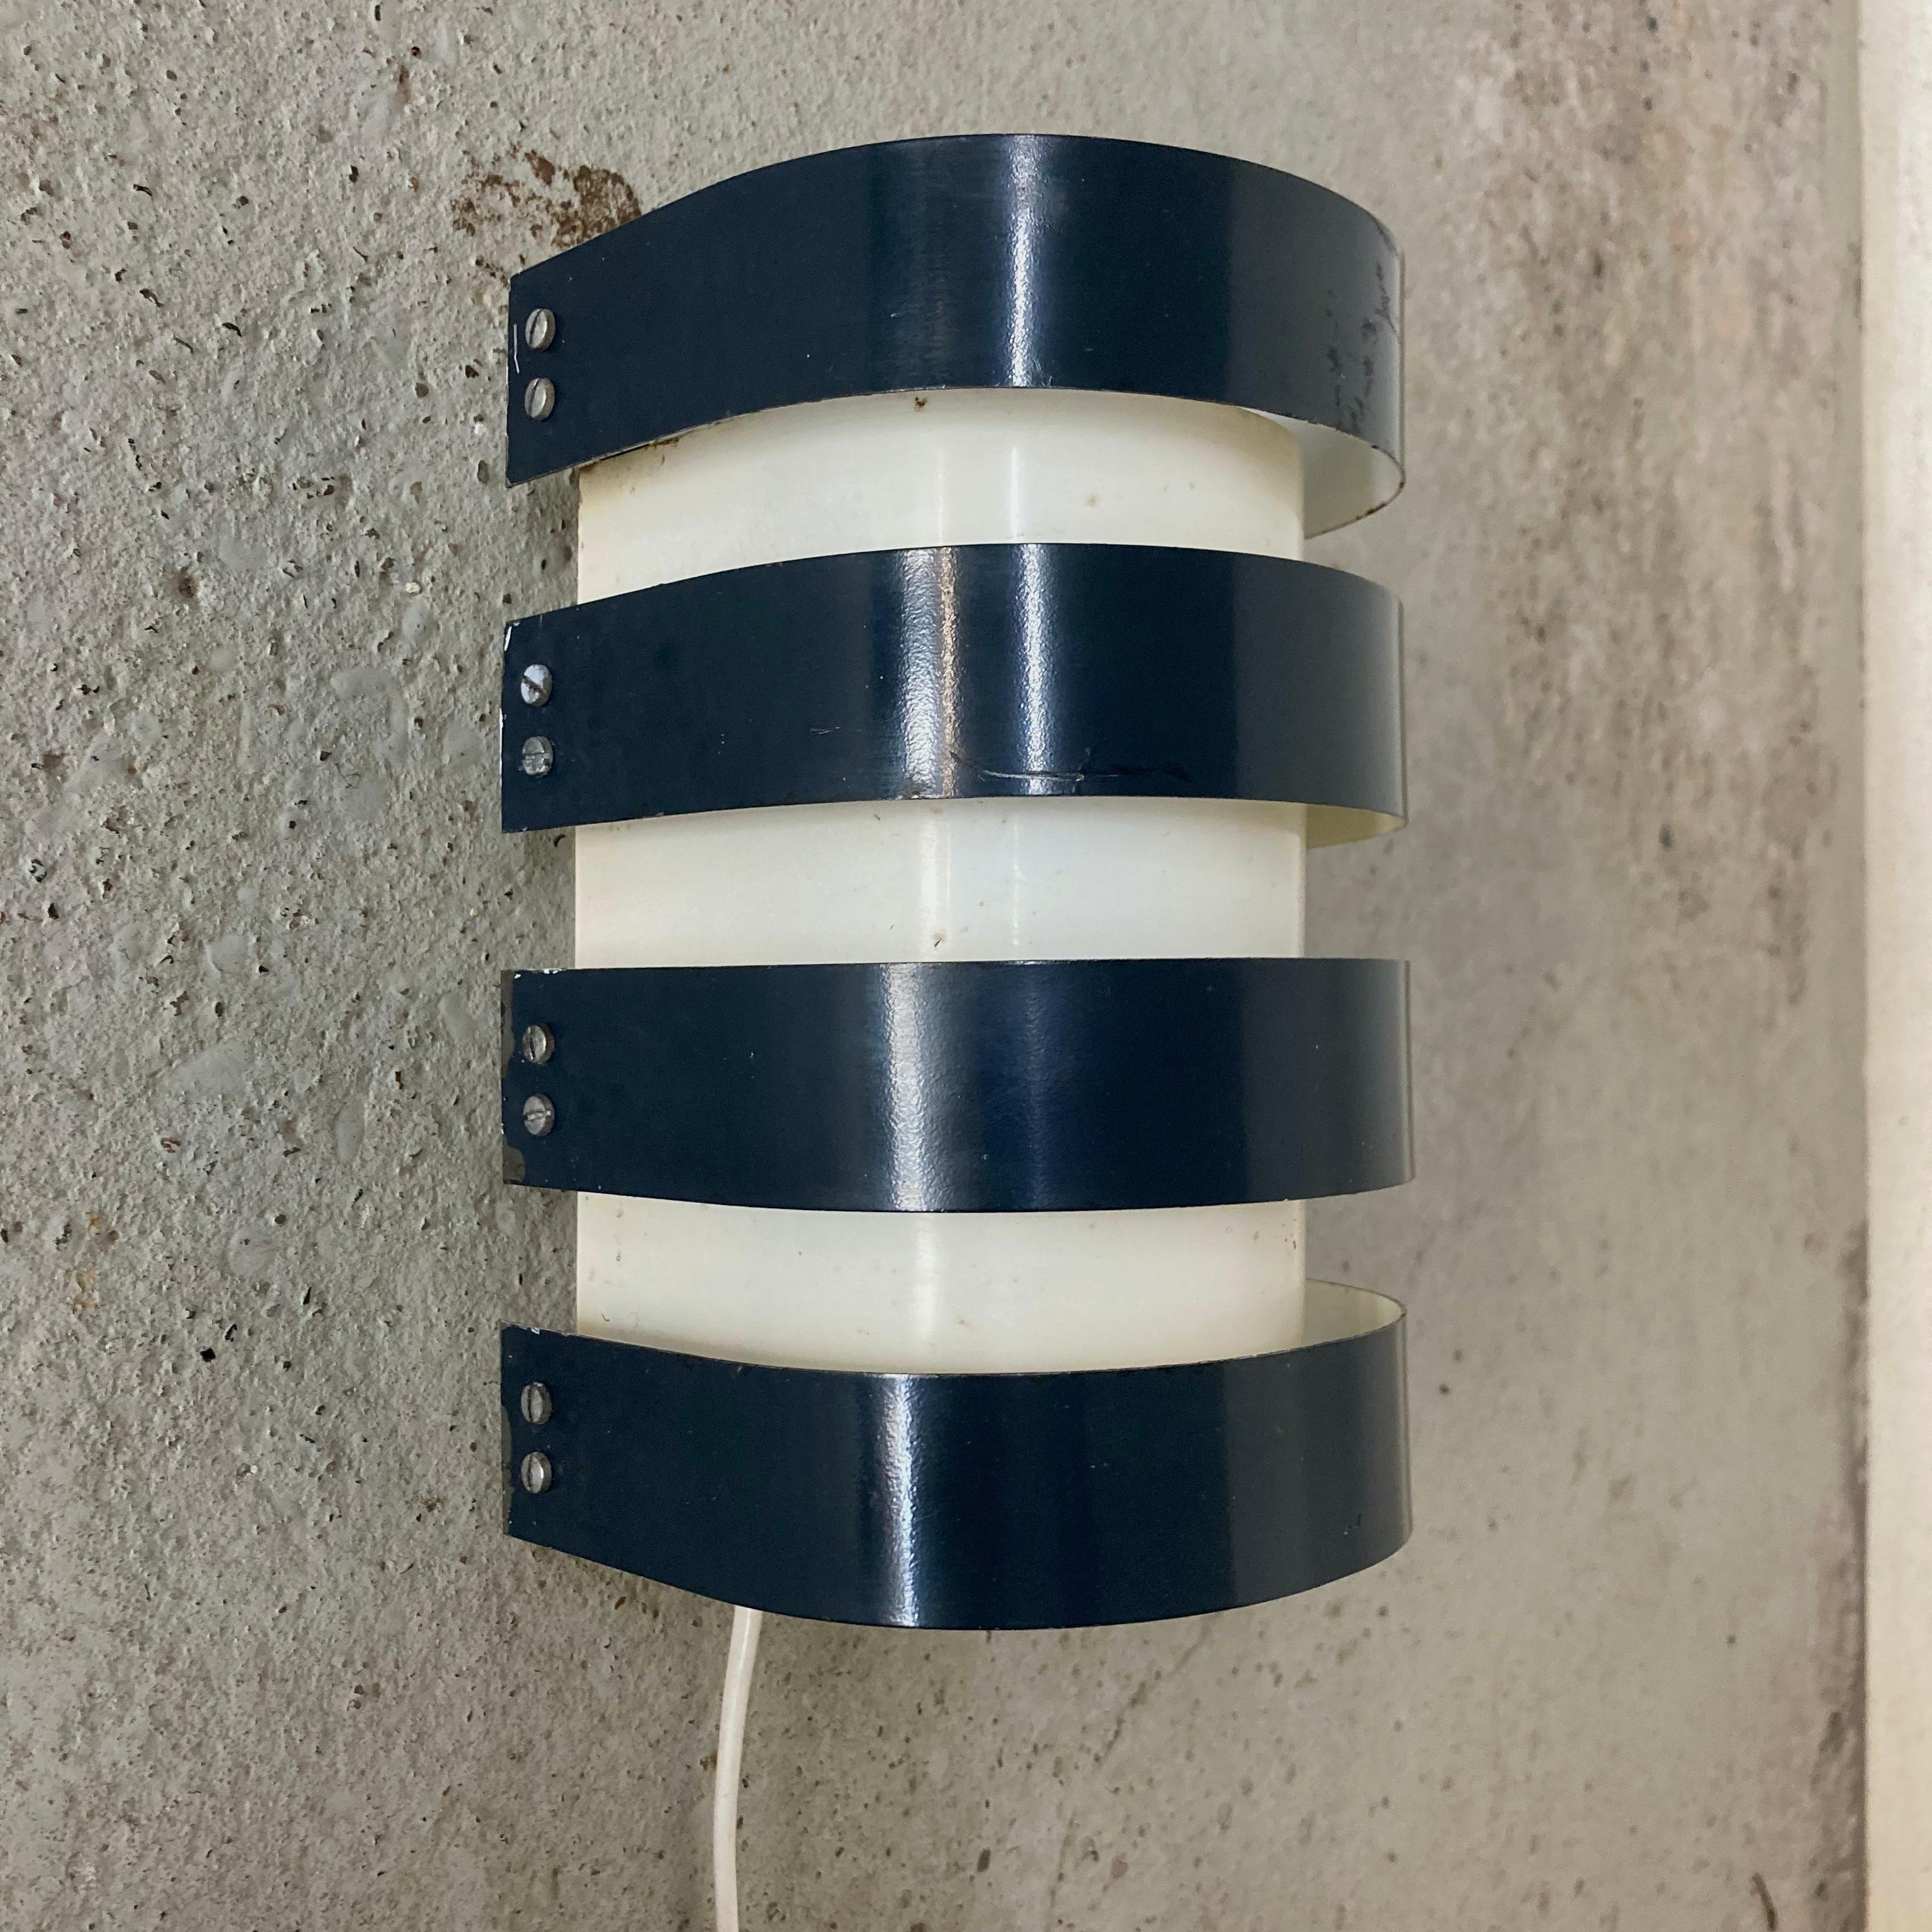 Mid-20th Century Wall lamp in Lacquered Metal by ITSU Finland, 1950s For Sale